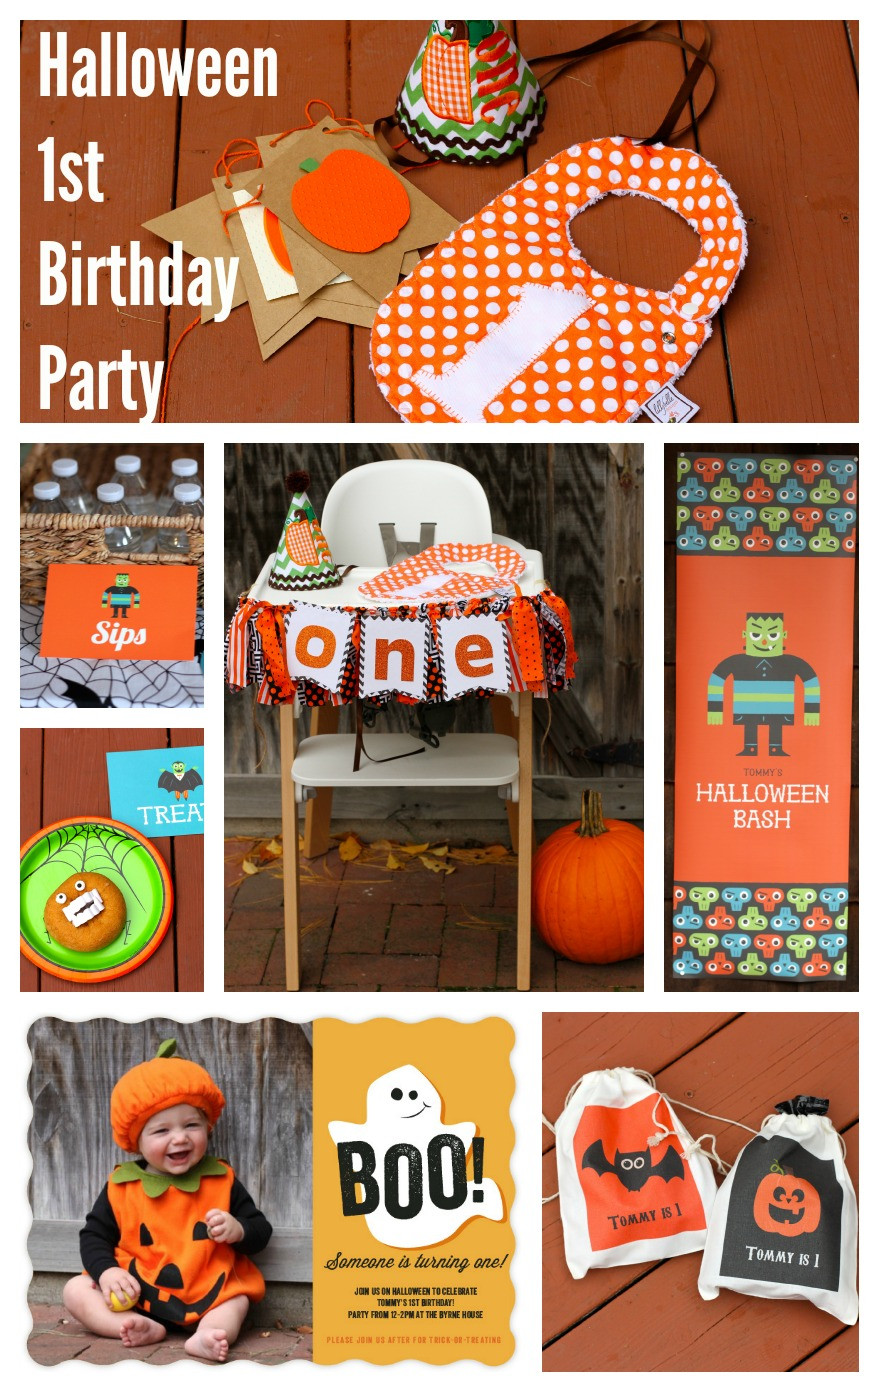 Halloween Bday Party Ideas
 A Halloween First Birthday Party Invites Decor and Party